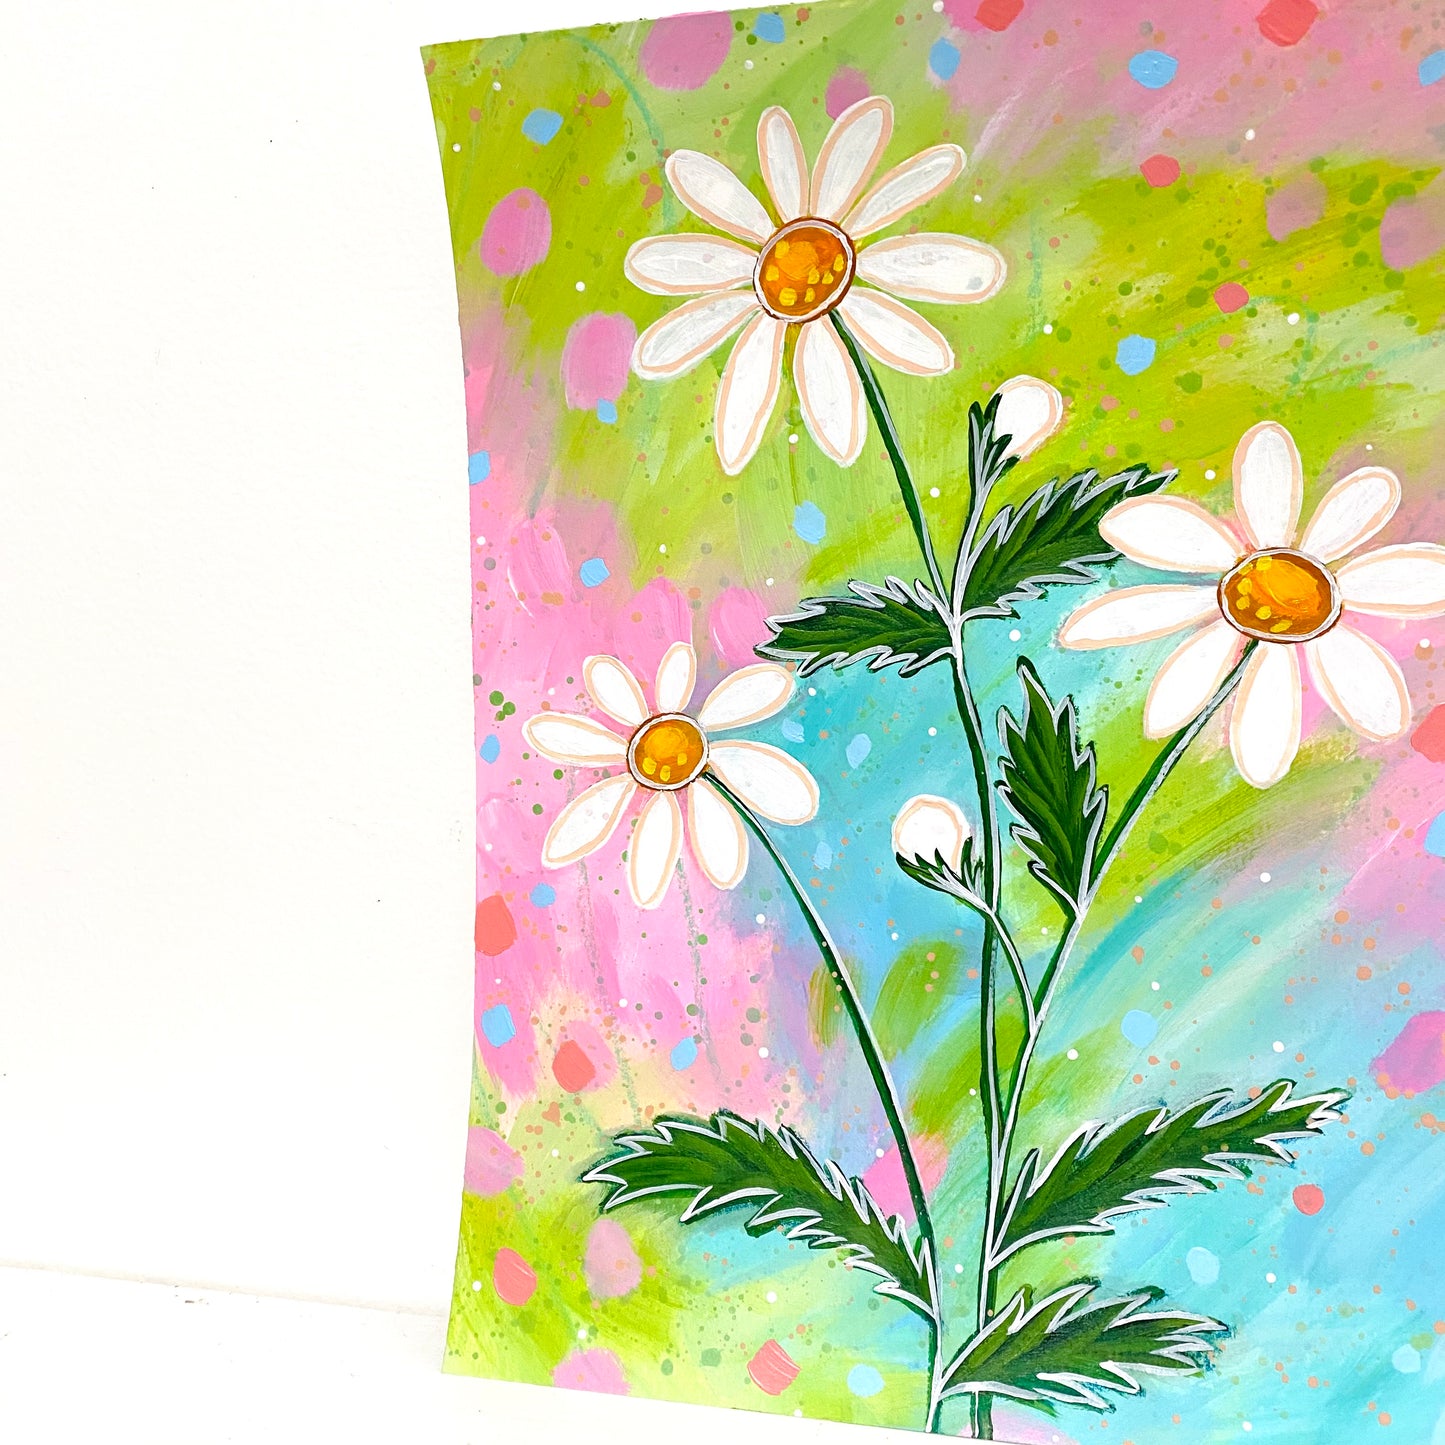 February Flowers Day 12 Daisy 8.5x11 inch original painting